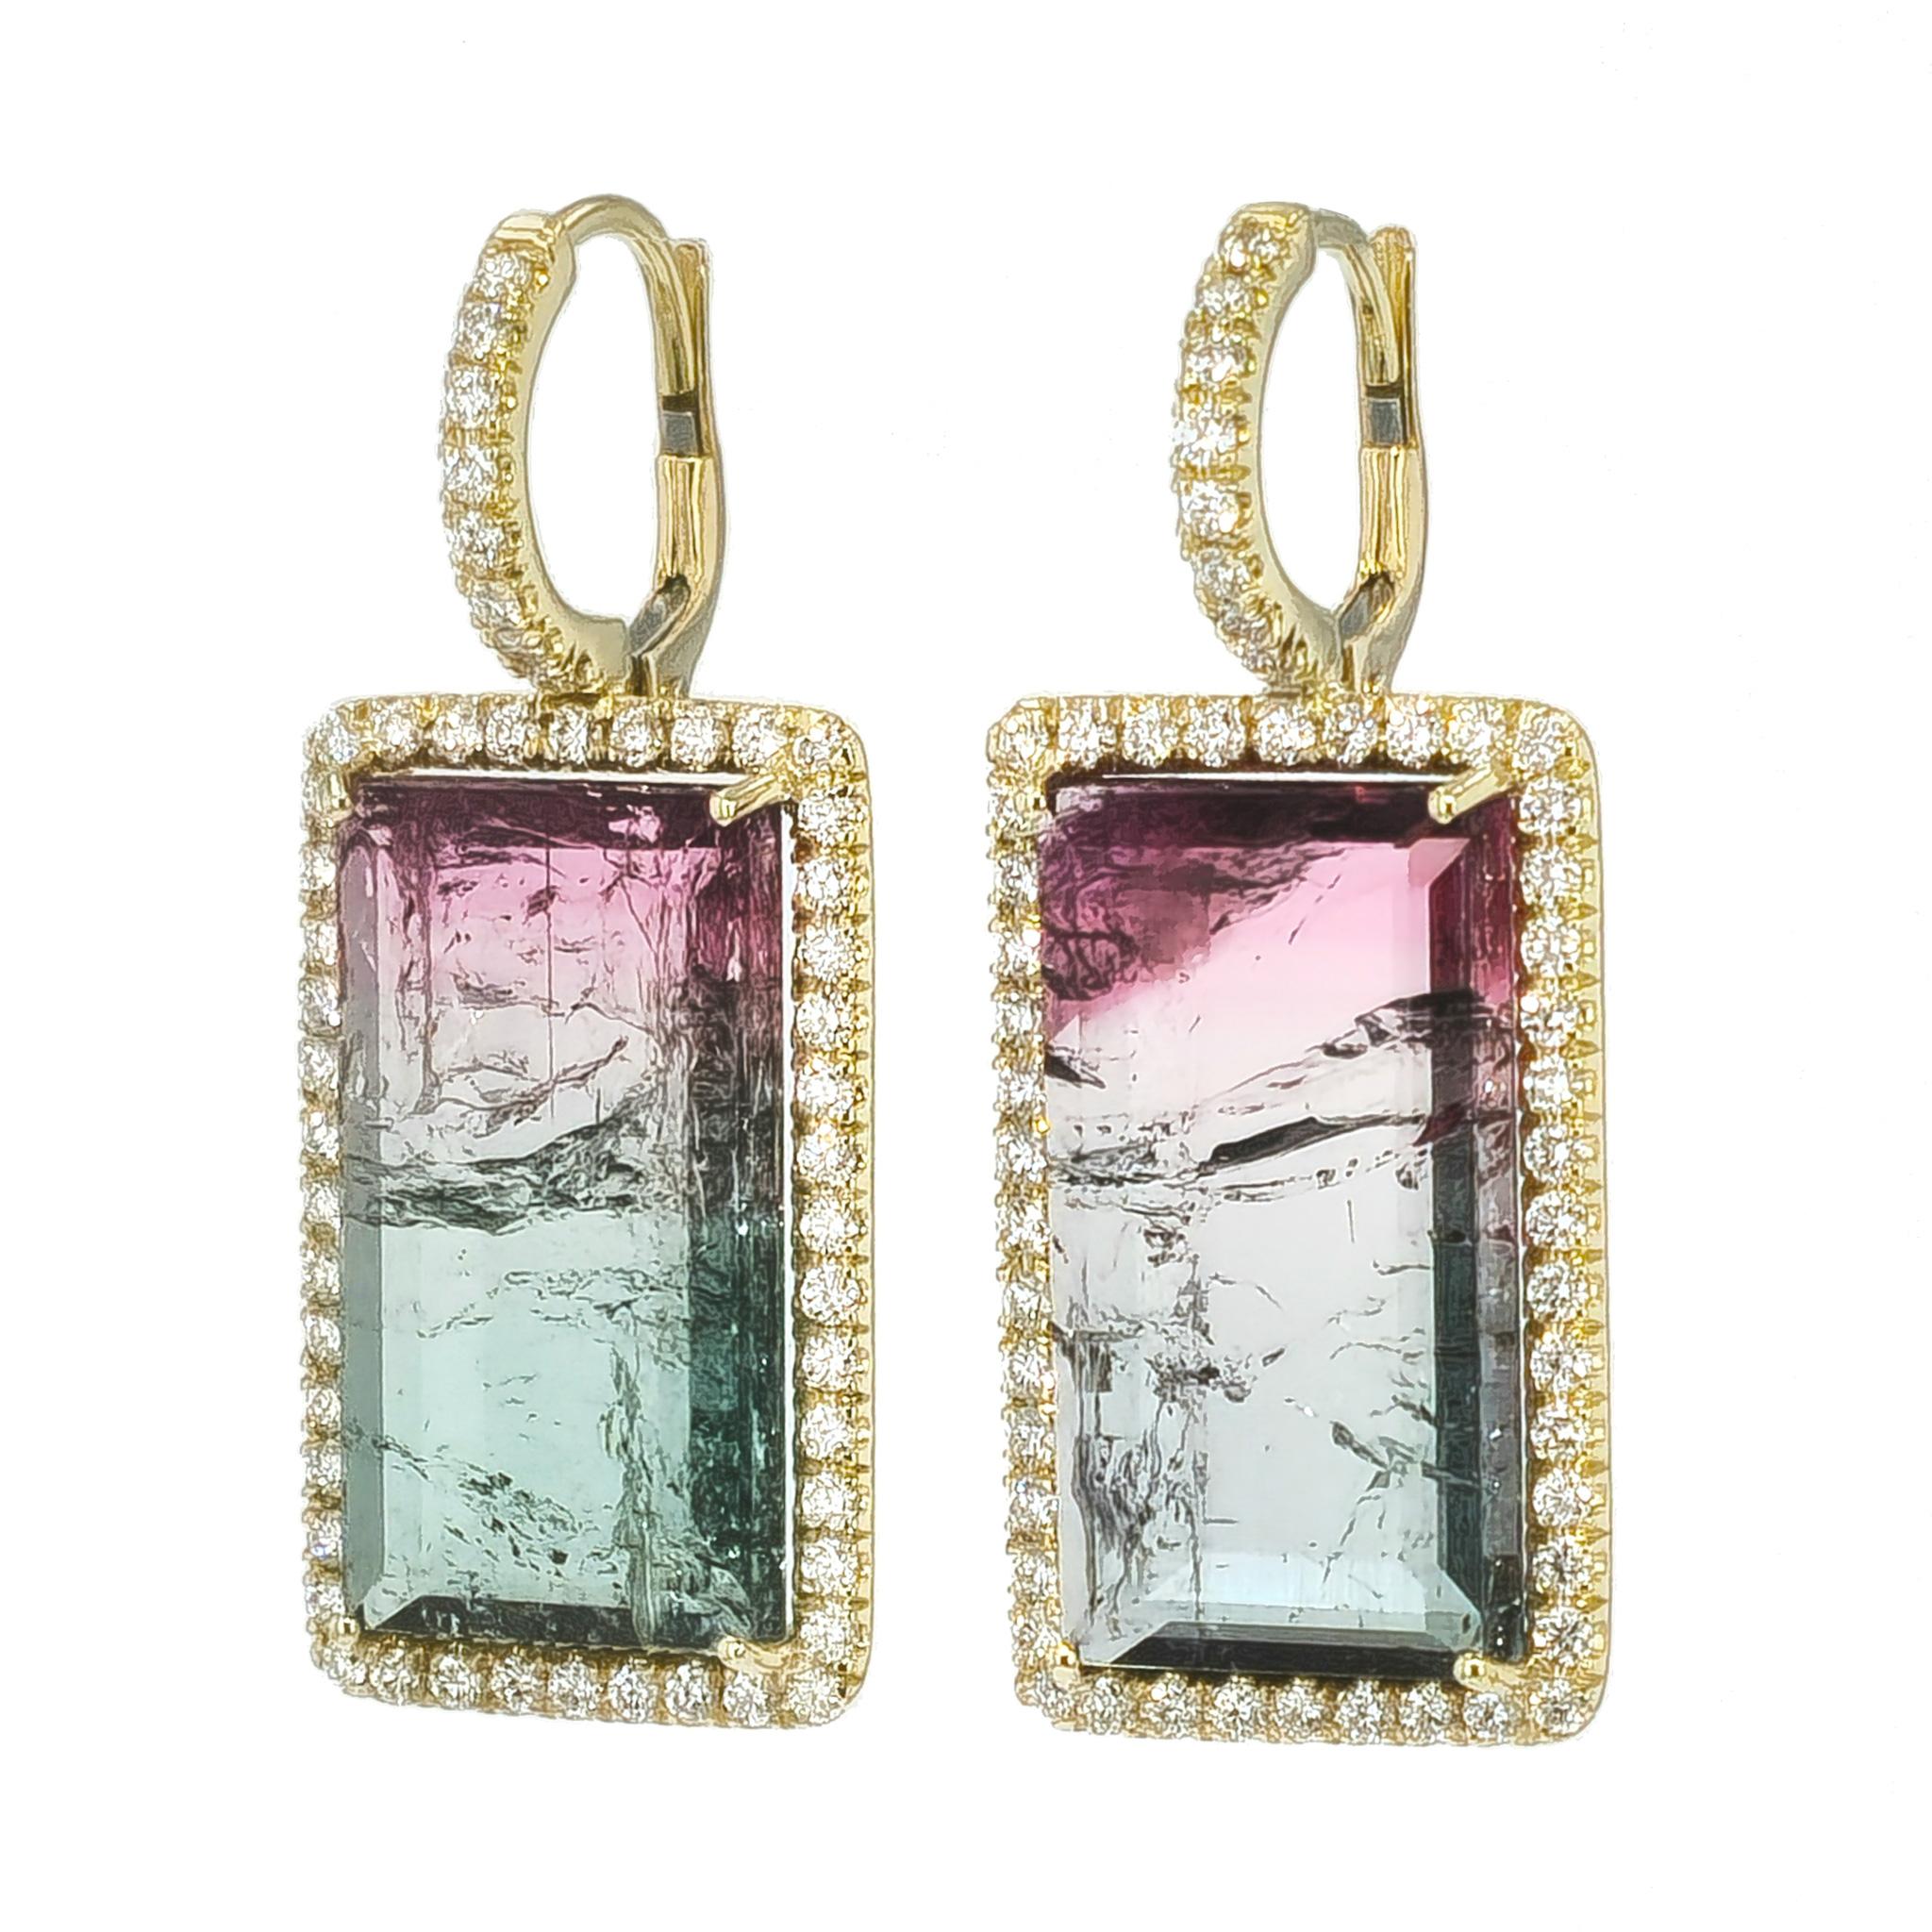 These one of a kind, handmade earrings are crafted in 18 karat gold. They boast 26.94 carats of stunning, bi-colored tourmalines that are artfully accompanied by 104 brilliant cut diamonds. 

These delicious earring measure 37 mm long and 15 mm